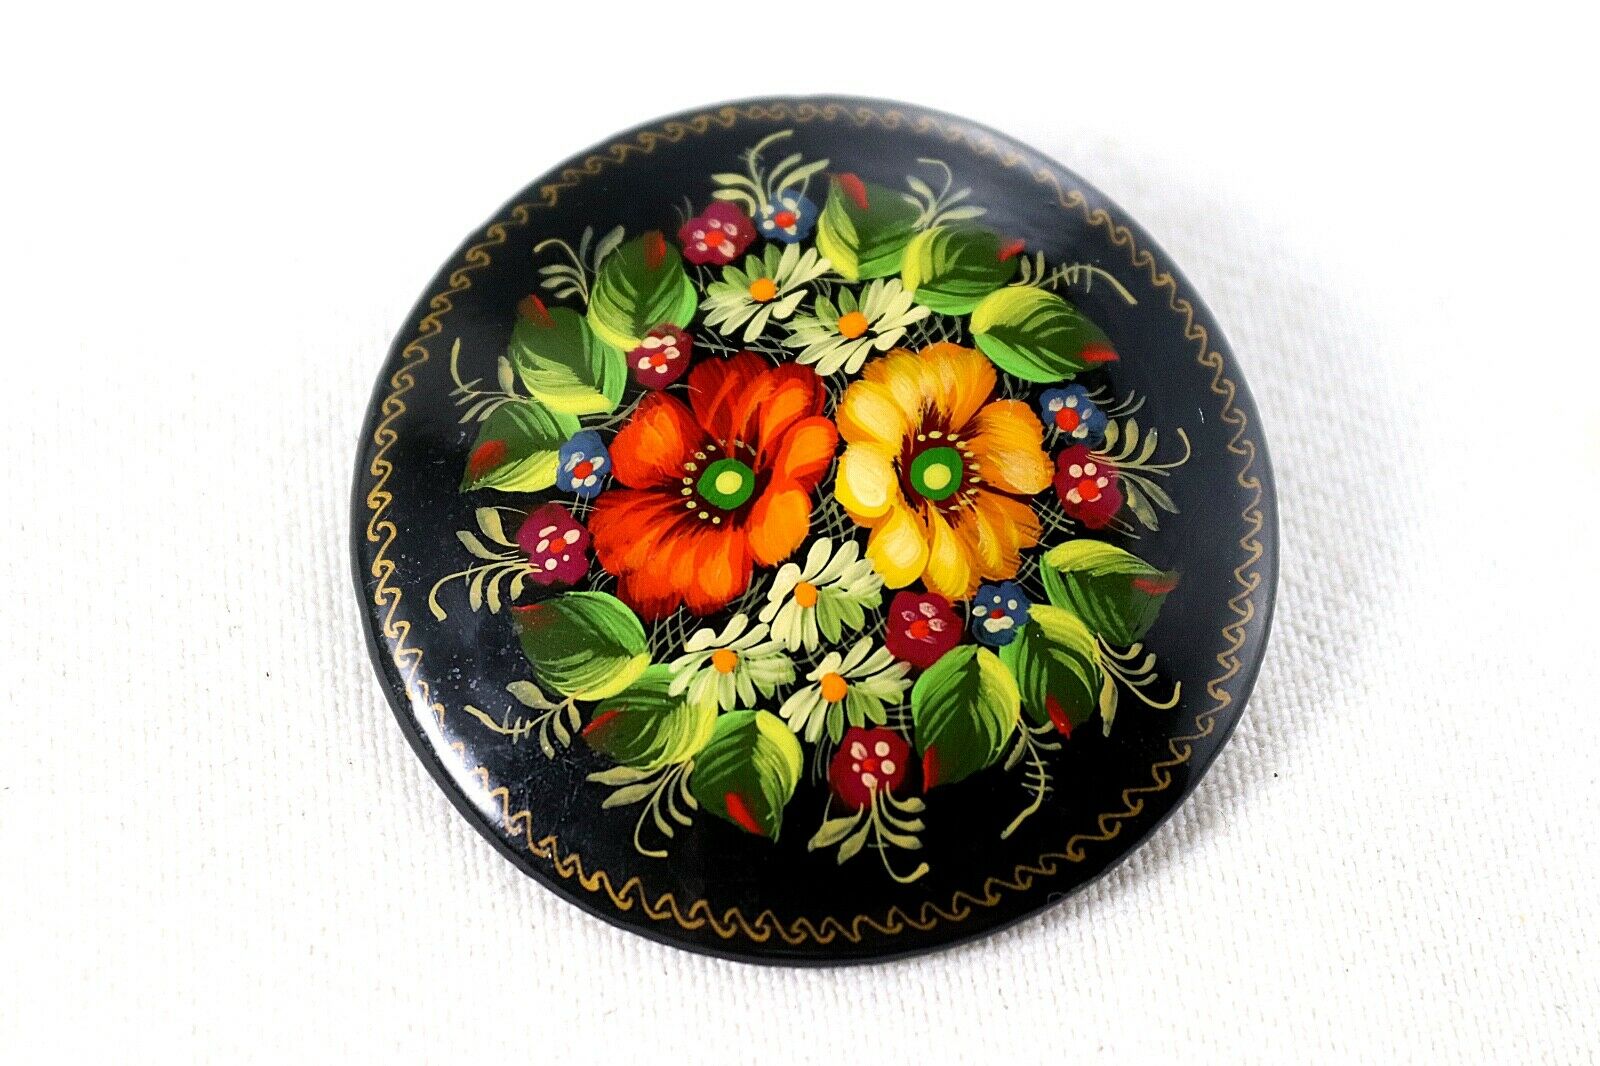 Russian Lacquer Handpaint Flowers Garden Brooch Pin Signed